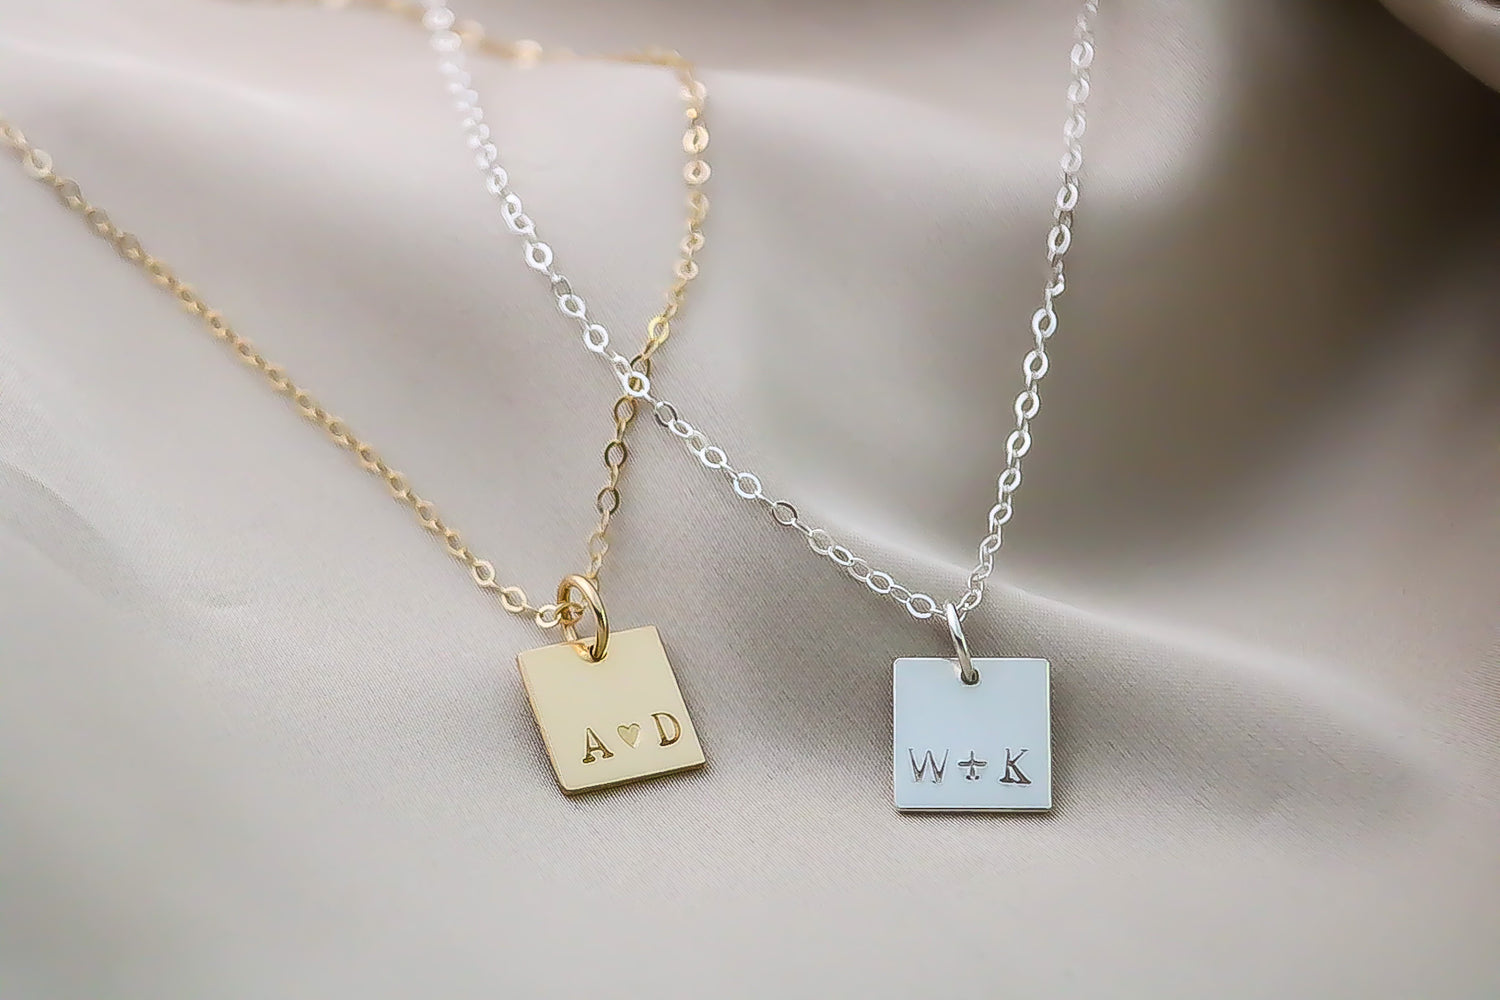 Tiny Lower Case Initial Charm in 14K Gold Over Sterling Silver, U